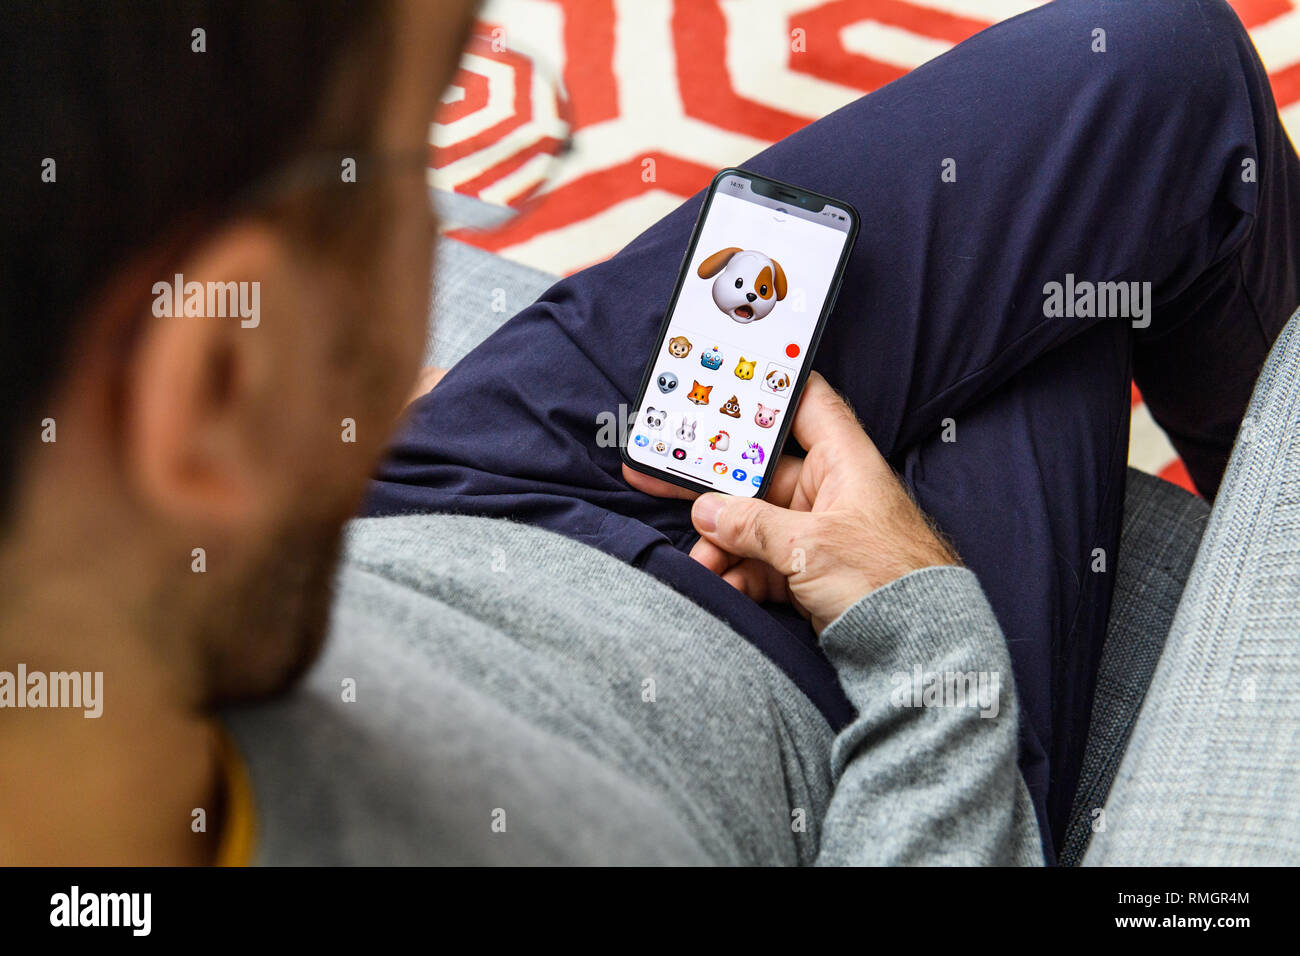 LONDON, UK - SEP 21, 2018: Man using the new astonished dog pet AR Memoji emoji face  on Apple iPhone Xs with the immense OLED retina display and a12 bionic chip, with the face  Stock Photo